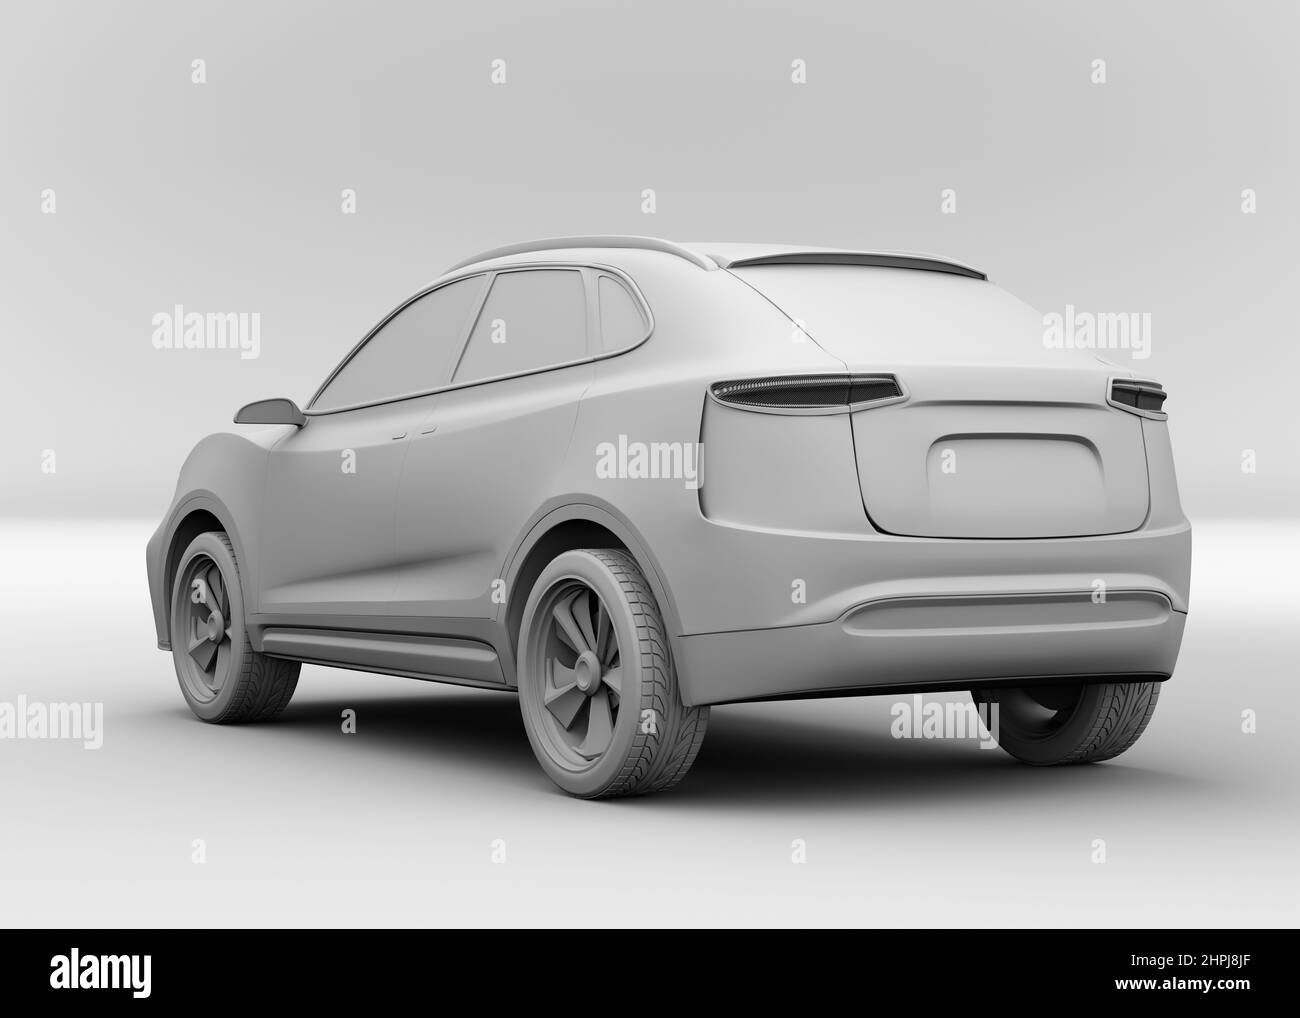 Clay model rendering pf generic Electric SUV charging at roadside charging station. 3D rendering image. Stock Photo